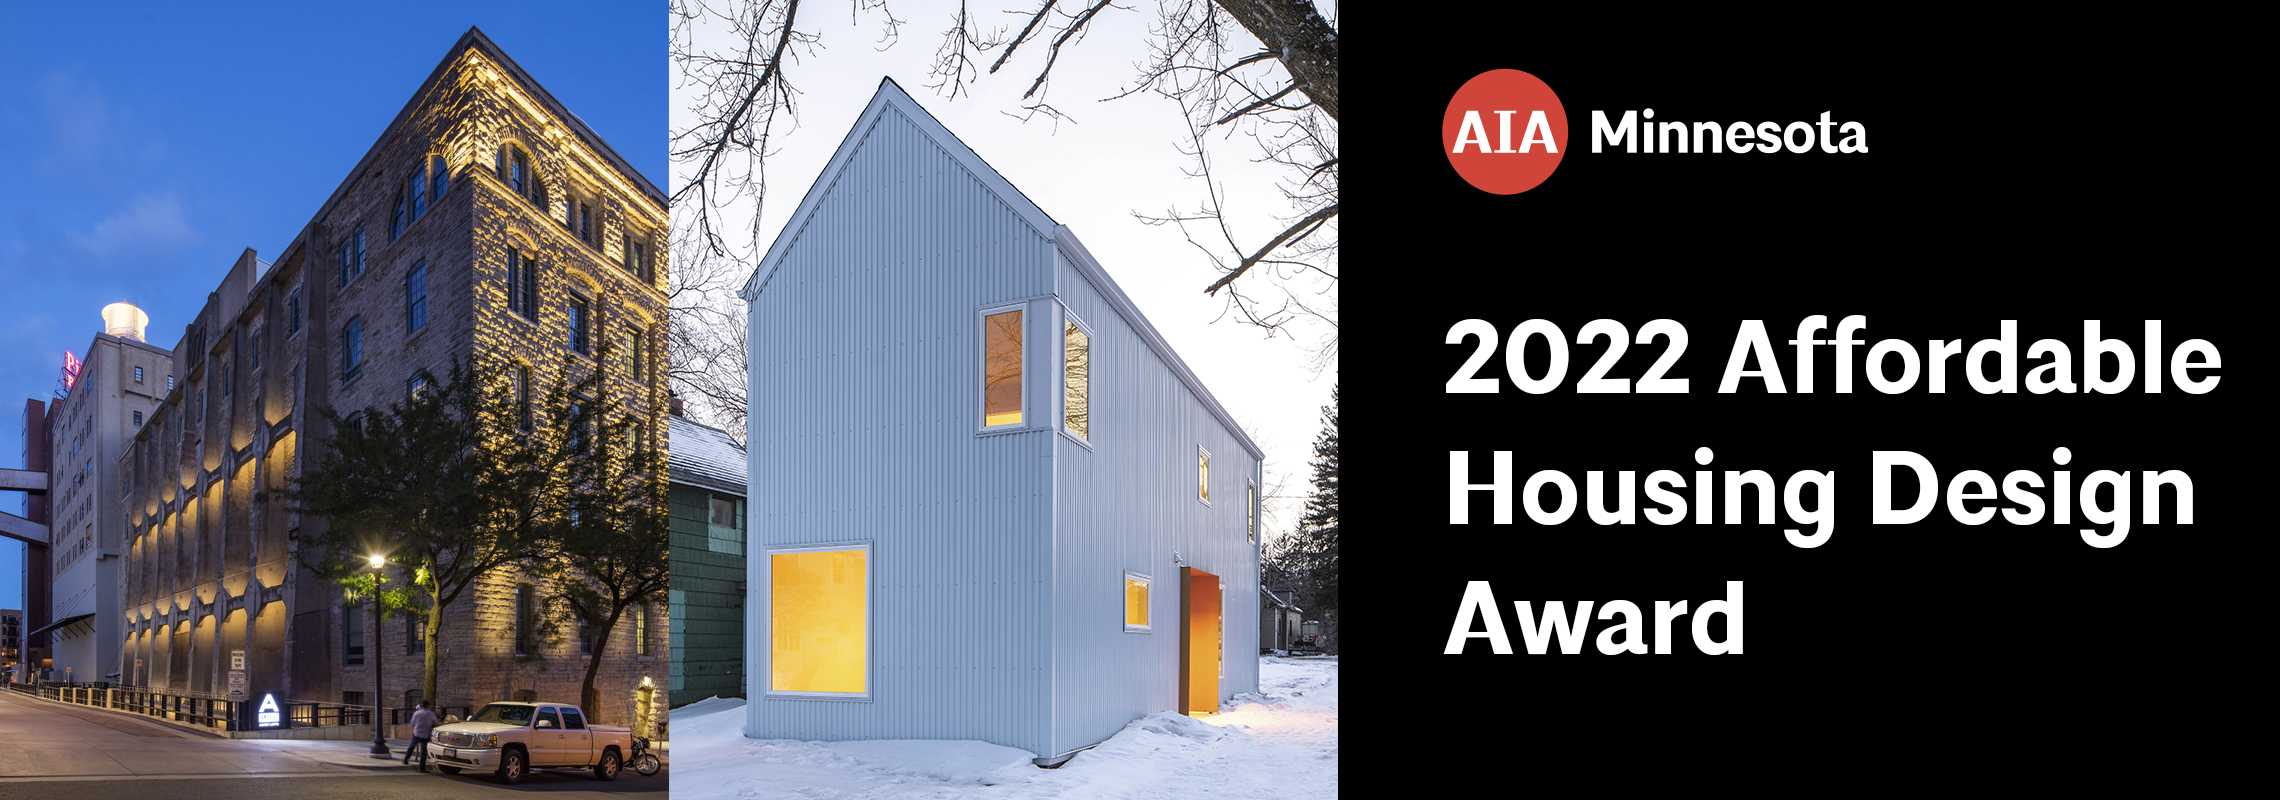 2022 Affordable Housing Design Award Given to Two Projects